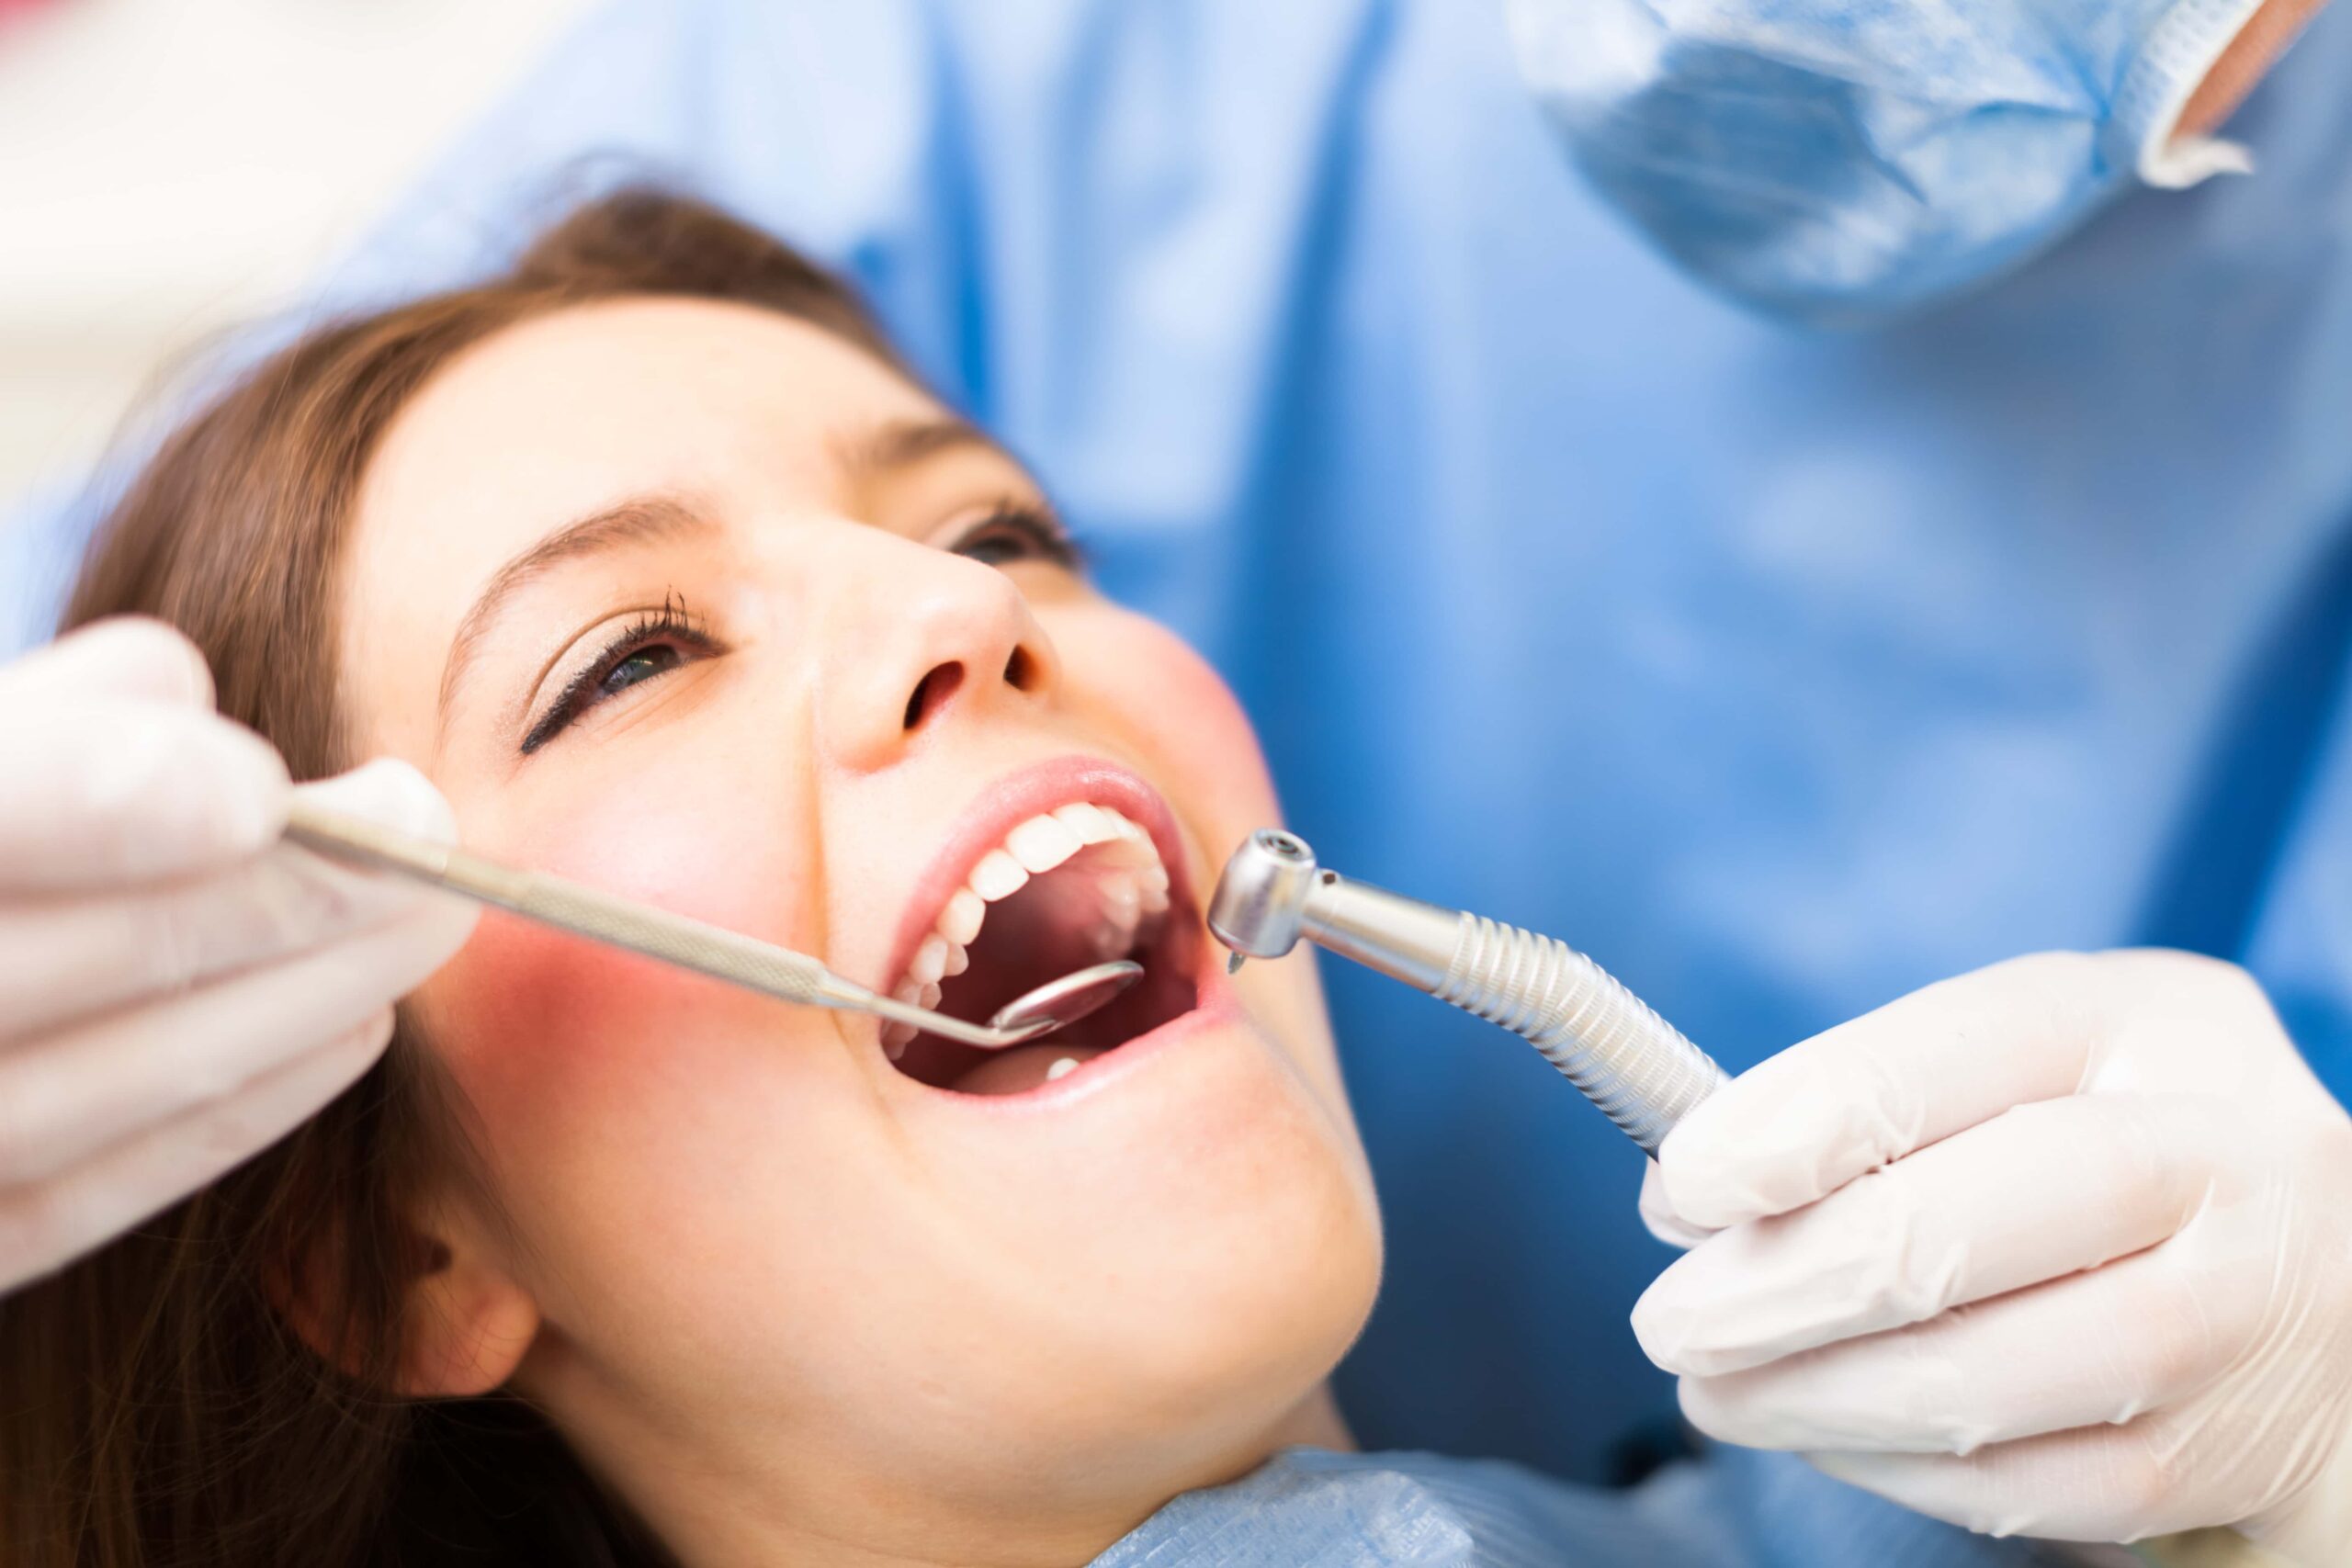 What Is Oral Surgery in Dentistry